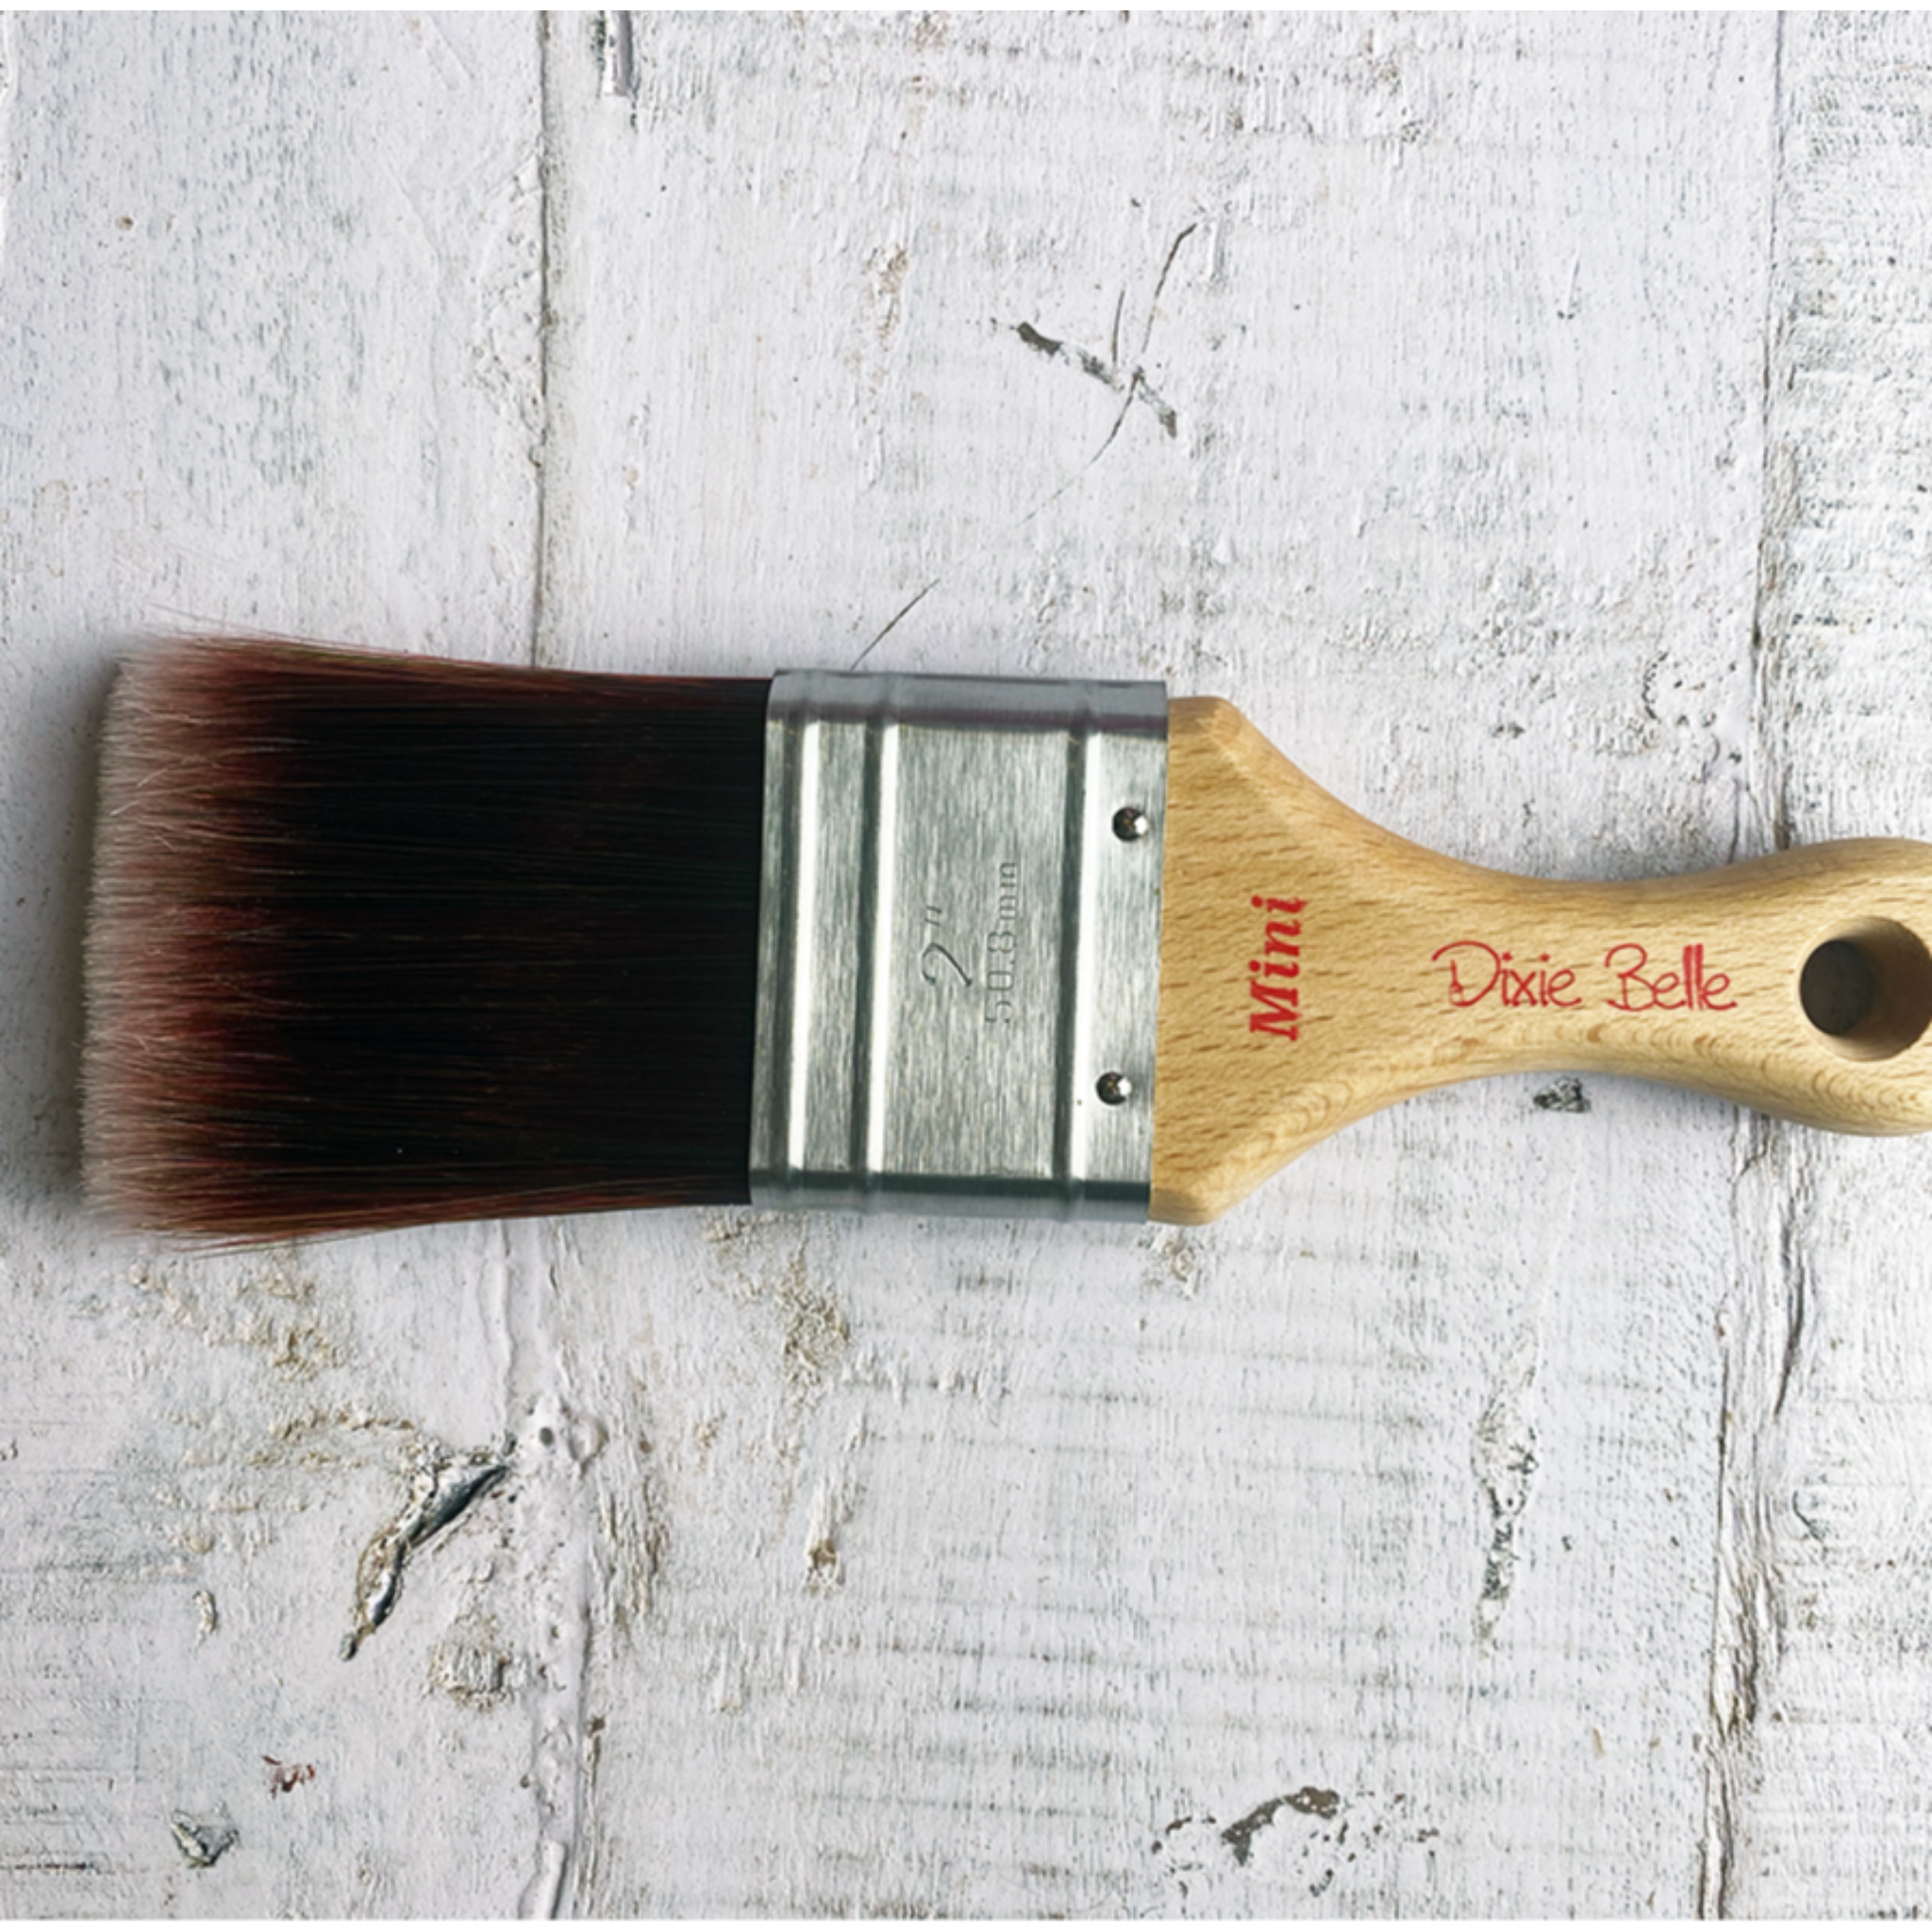 Dixie Belle Paint Company's Mini Synthetic Paint Brush is against a white wood background.